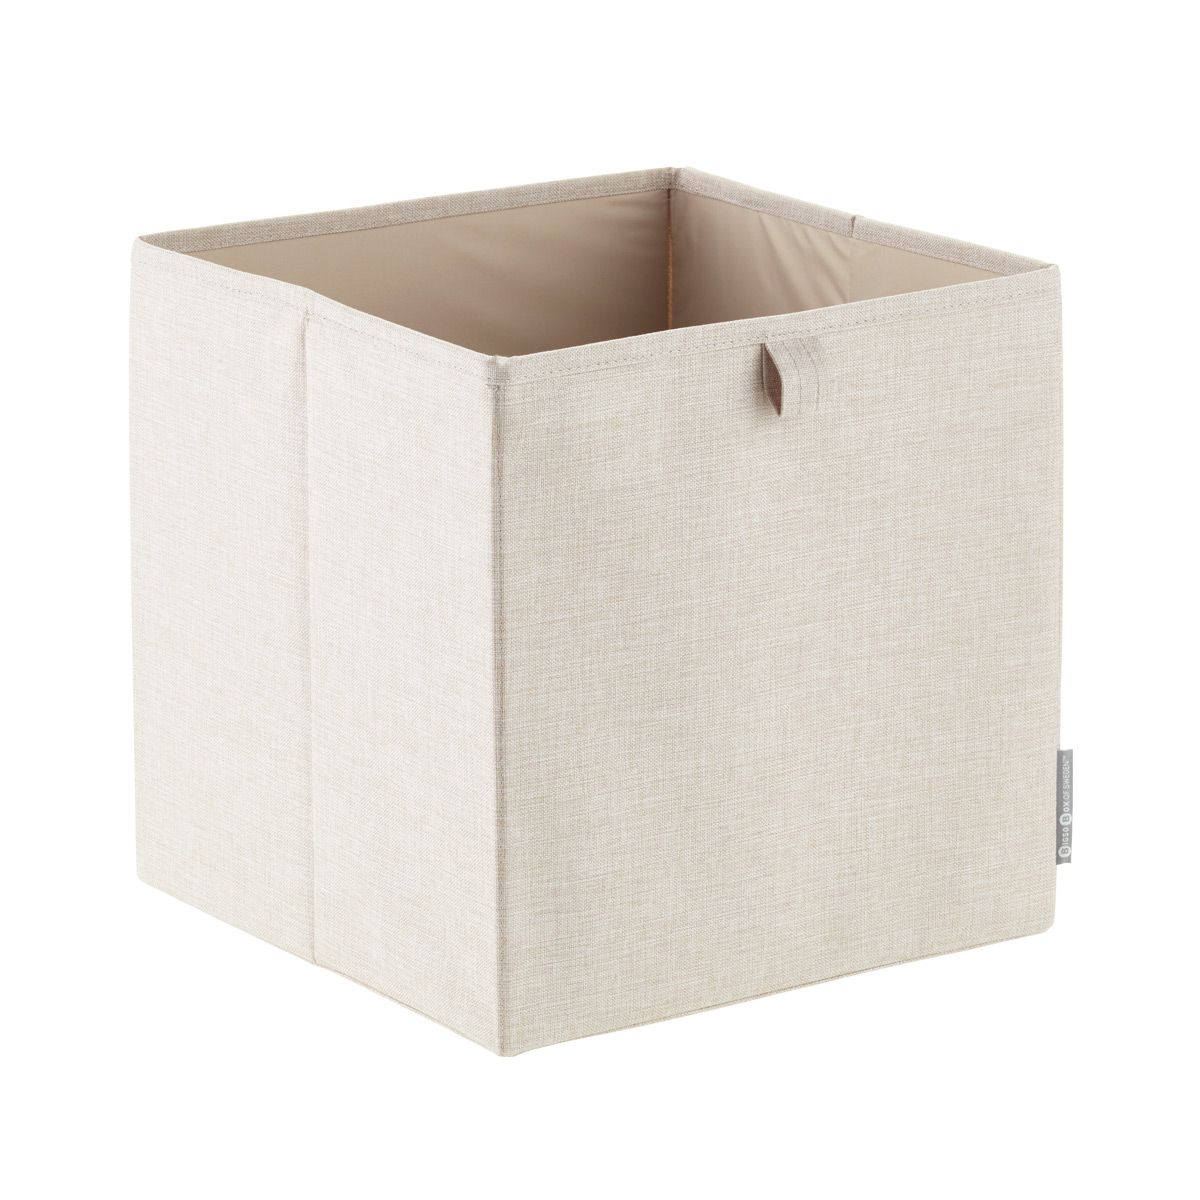 Fabric Storage Cube | The Container Store